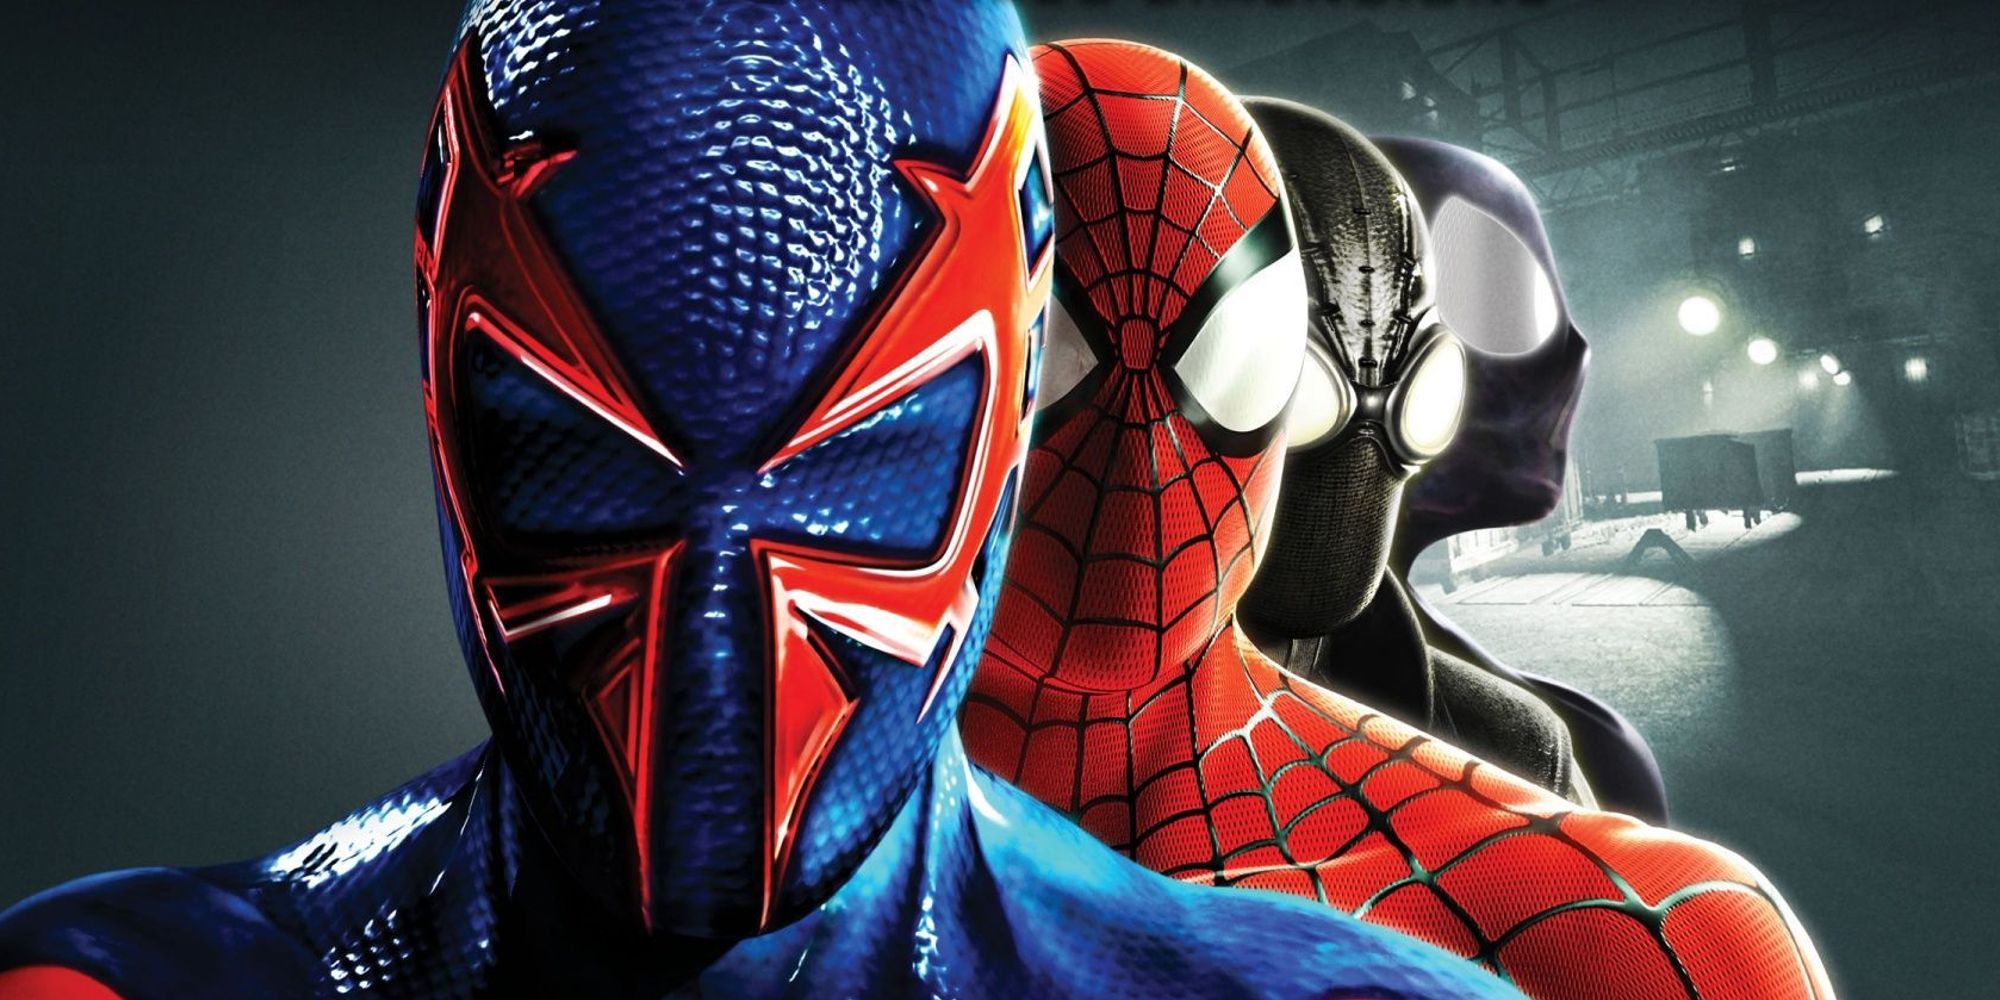 Spider-Man 2099, The Amazing Spider-Man, Spider-Noir, and Ultimate Spider-Man on a banner for Spider-Man Shattered Dimensions